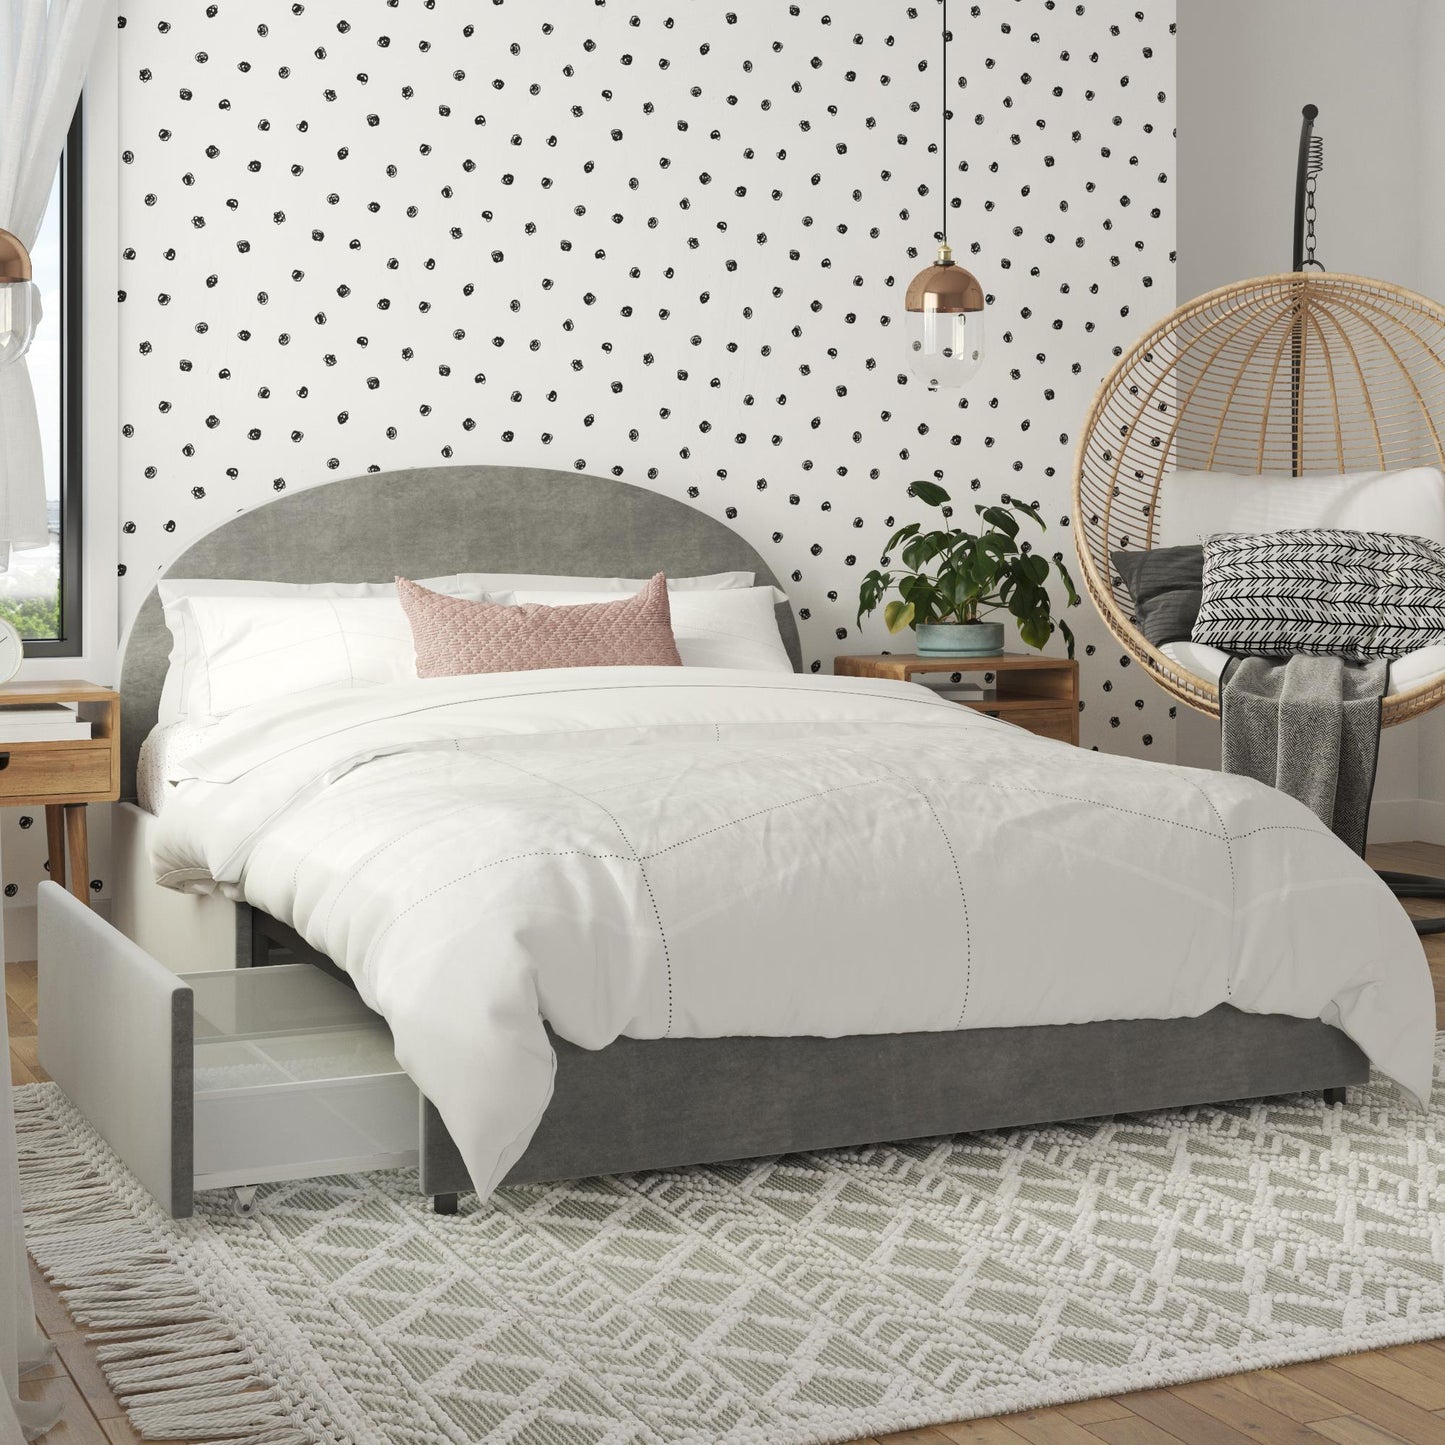 Moon Upholstered Bed with Storage - Light Gray - Queen